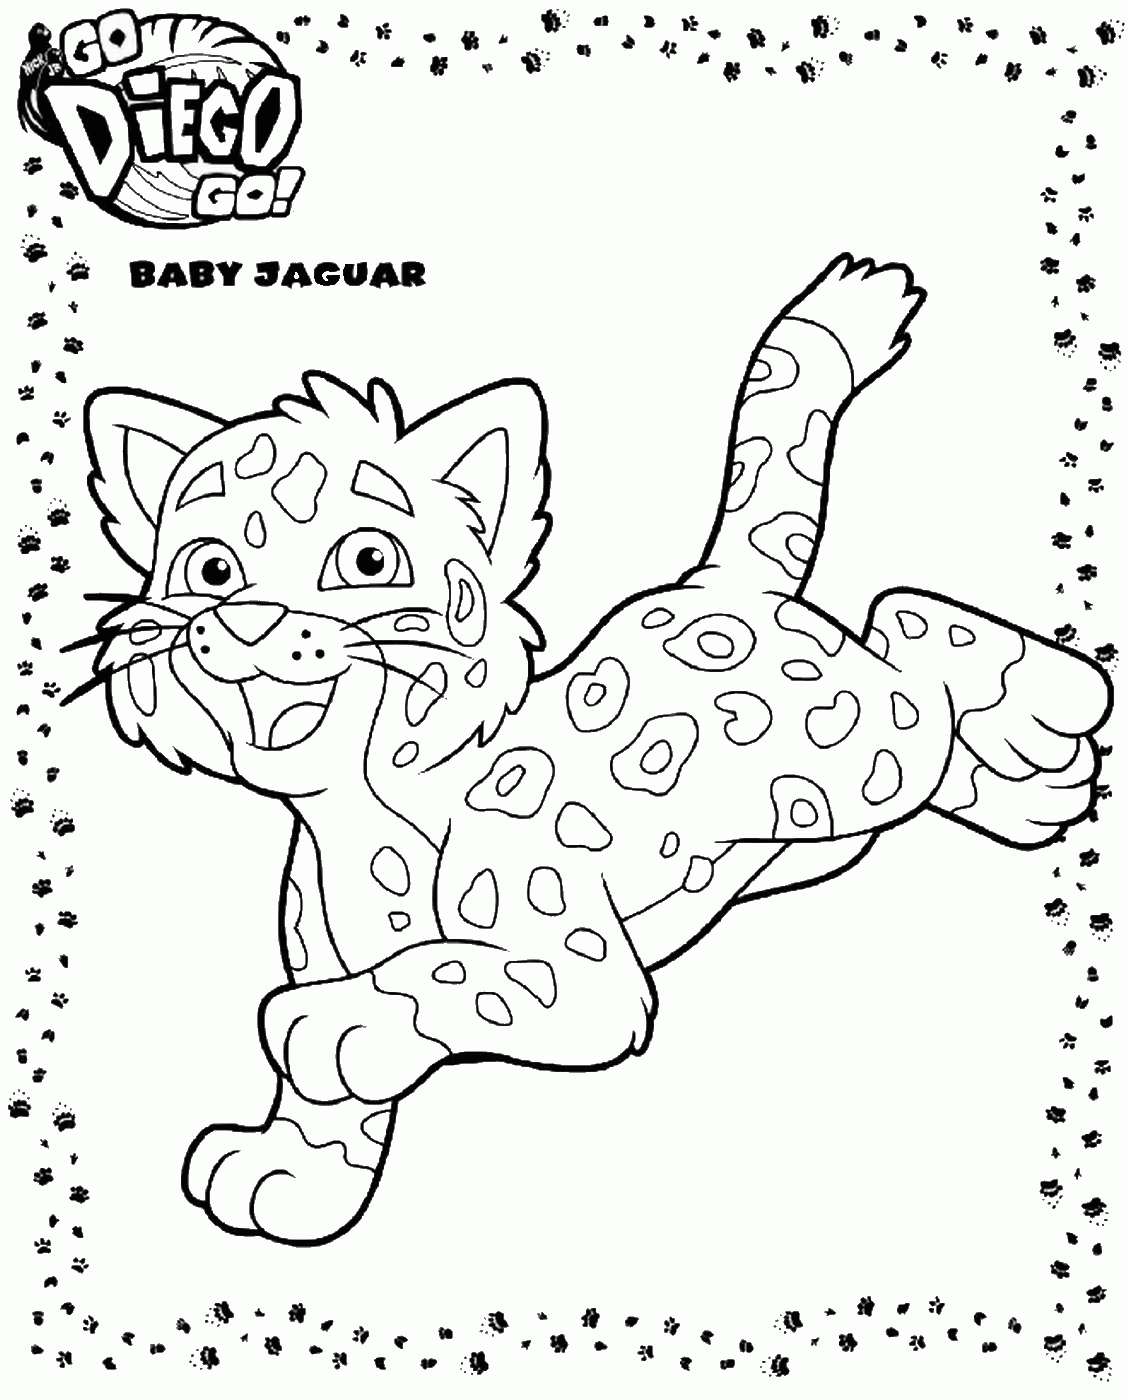 Go Diego Go Coloring Pages Cartoons run_diego_cl_13 Printable 2020 2957 Coloring4free